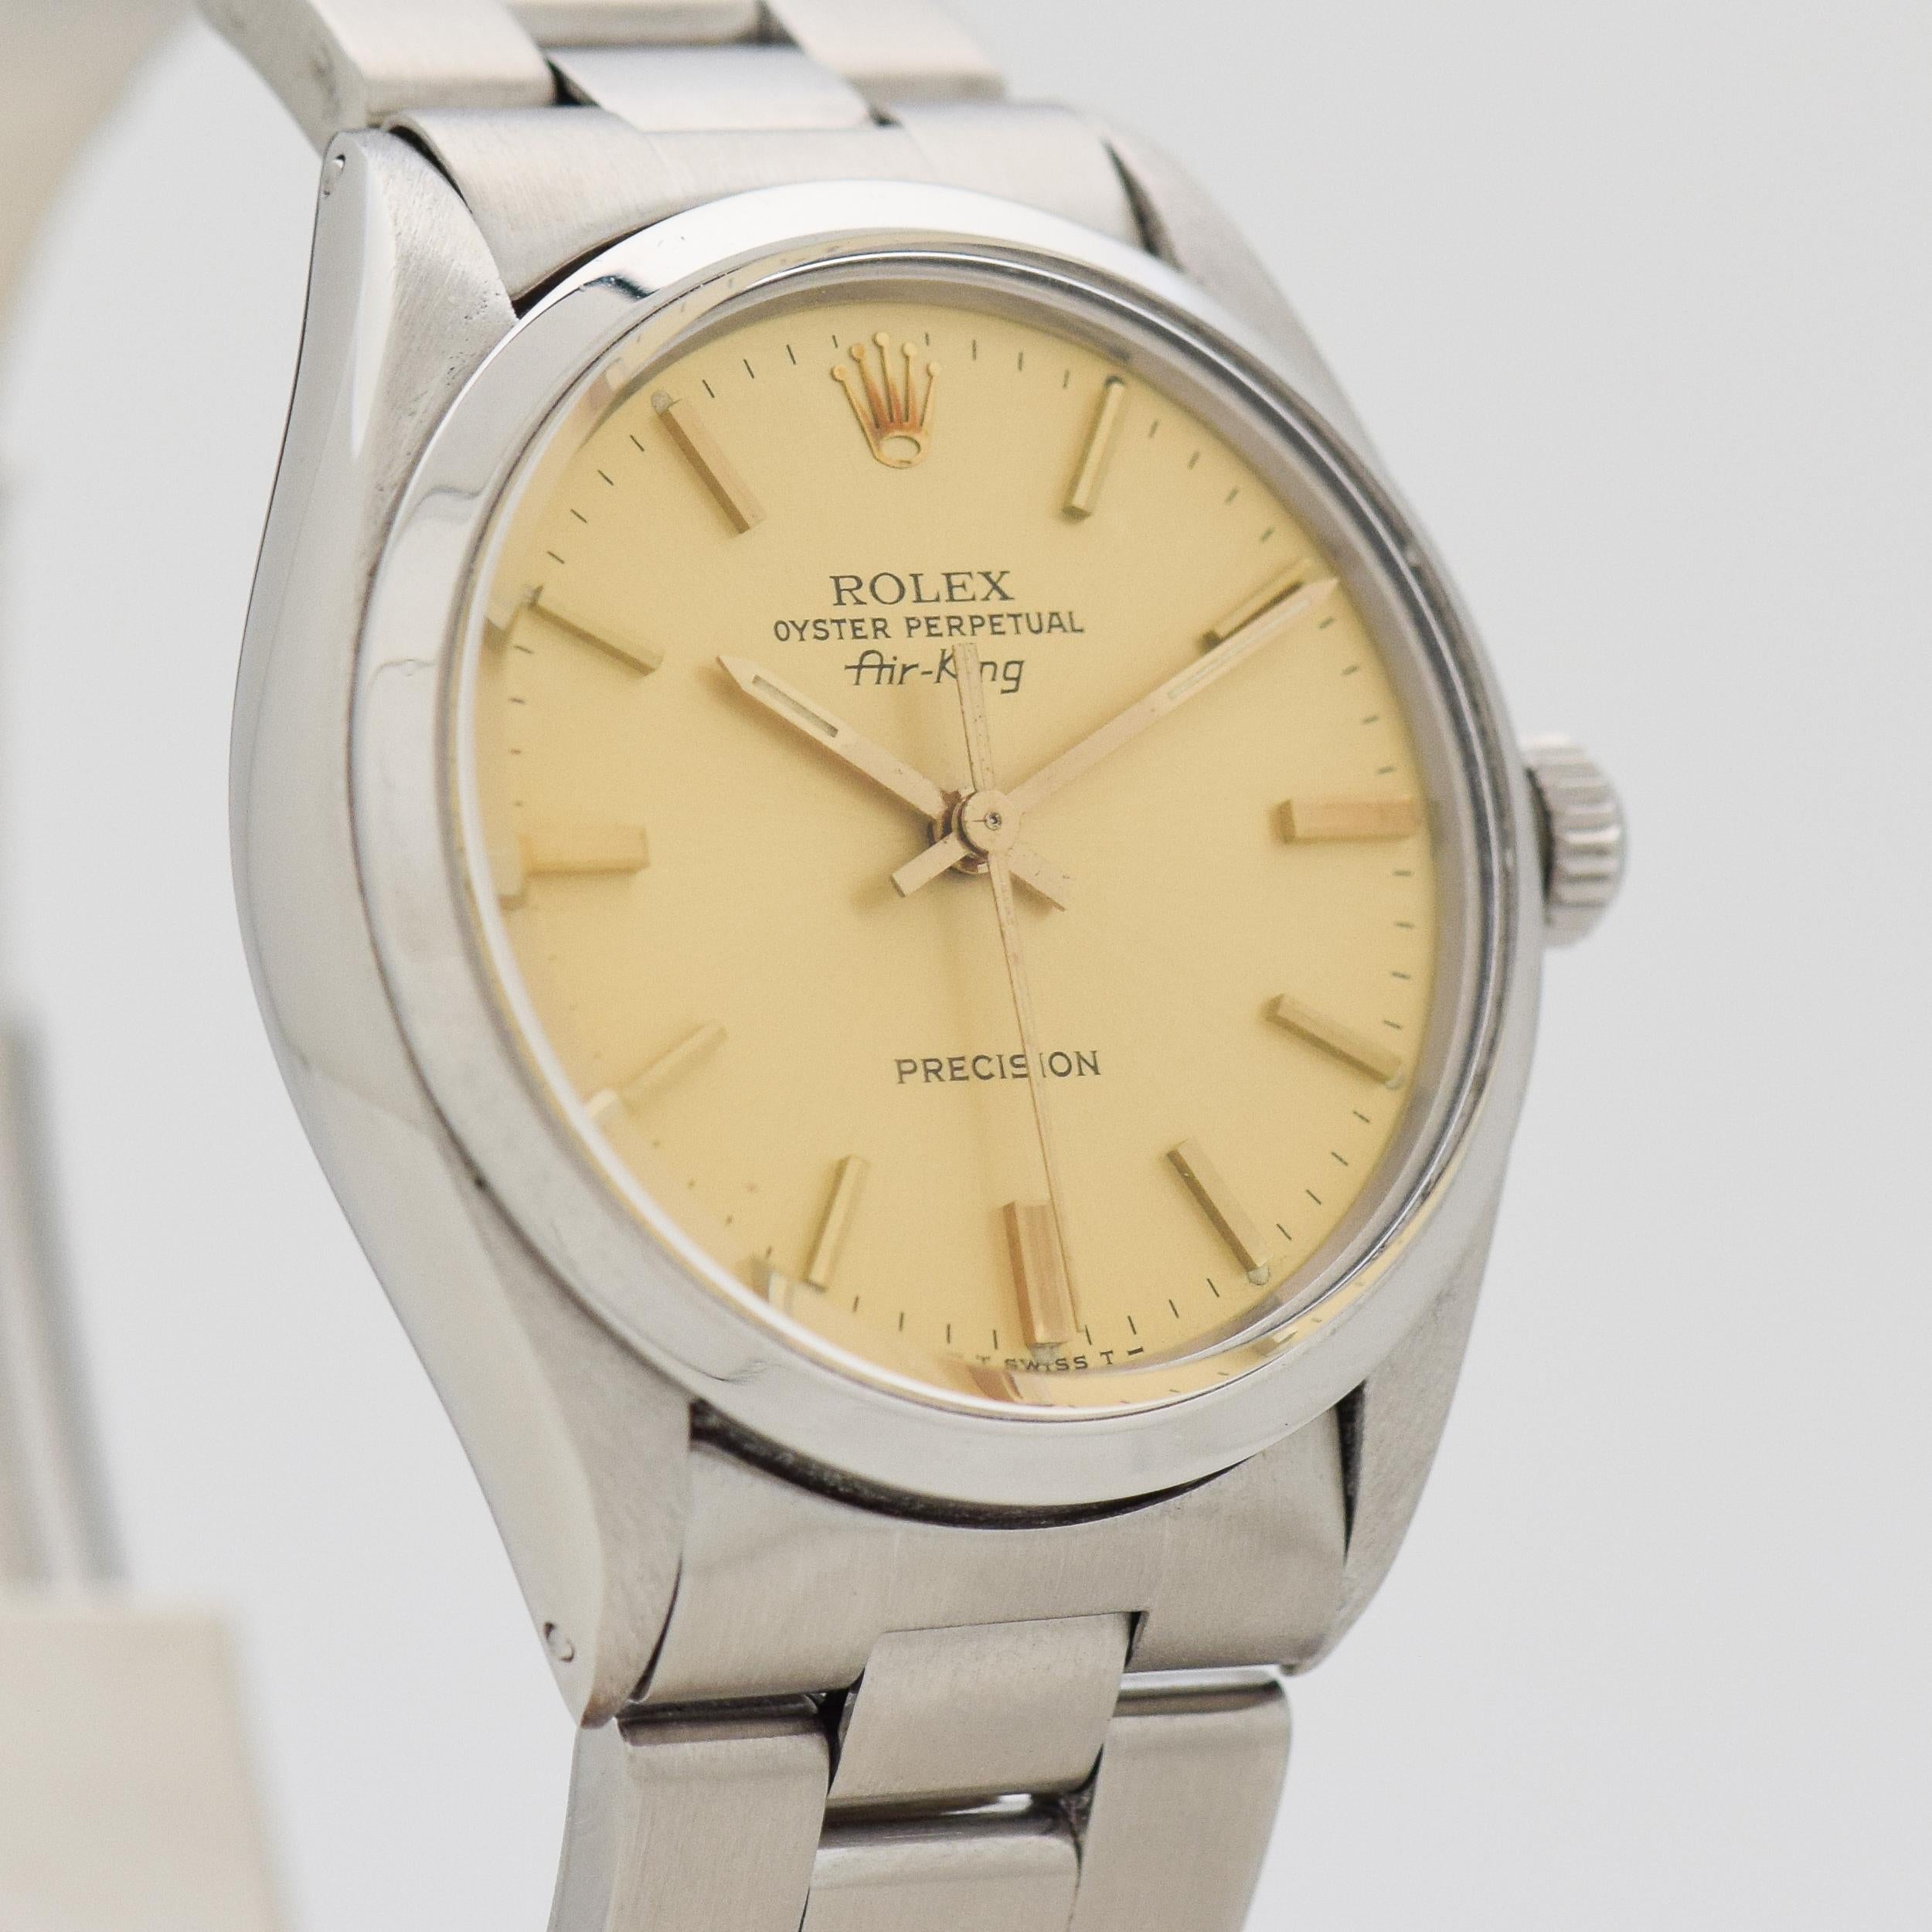 1979 Vintage Rolex Air-King Ref. 5500 Stainless Steel watch with Original Champagne Dial with Applied Gold Color Beveled Stick/Bar/Baton Markers with Original Rolex Stainless Steel Oyster Bracelet. 34mm x 38mm lug to lug (1.34 in. x 1.5 in.) - 26